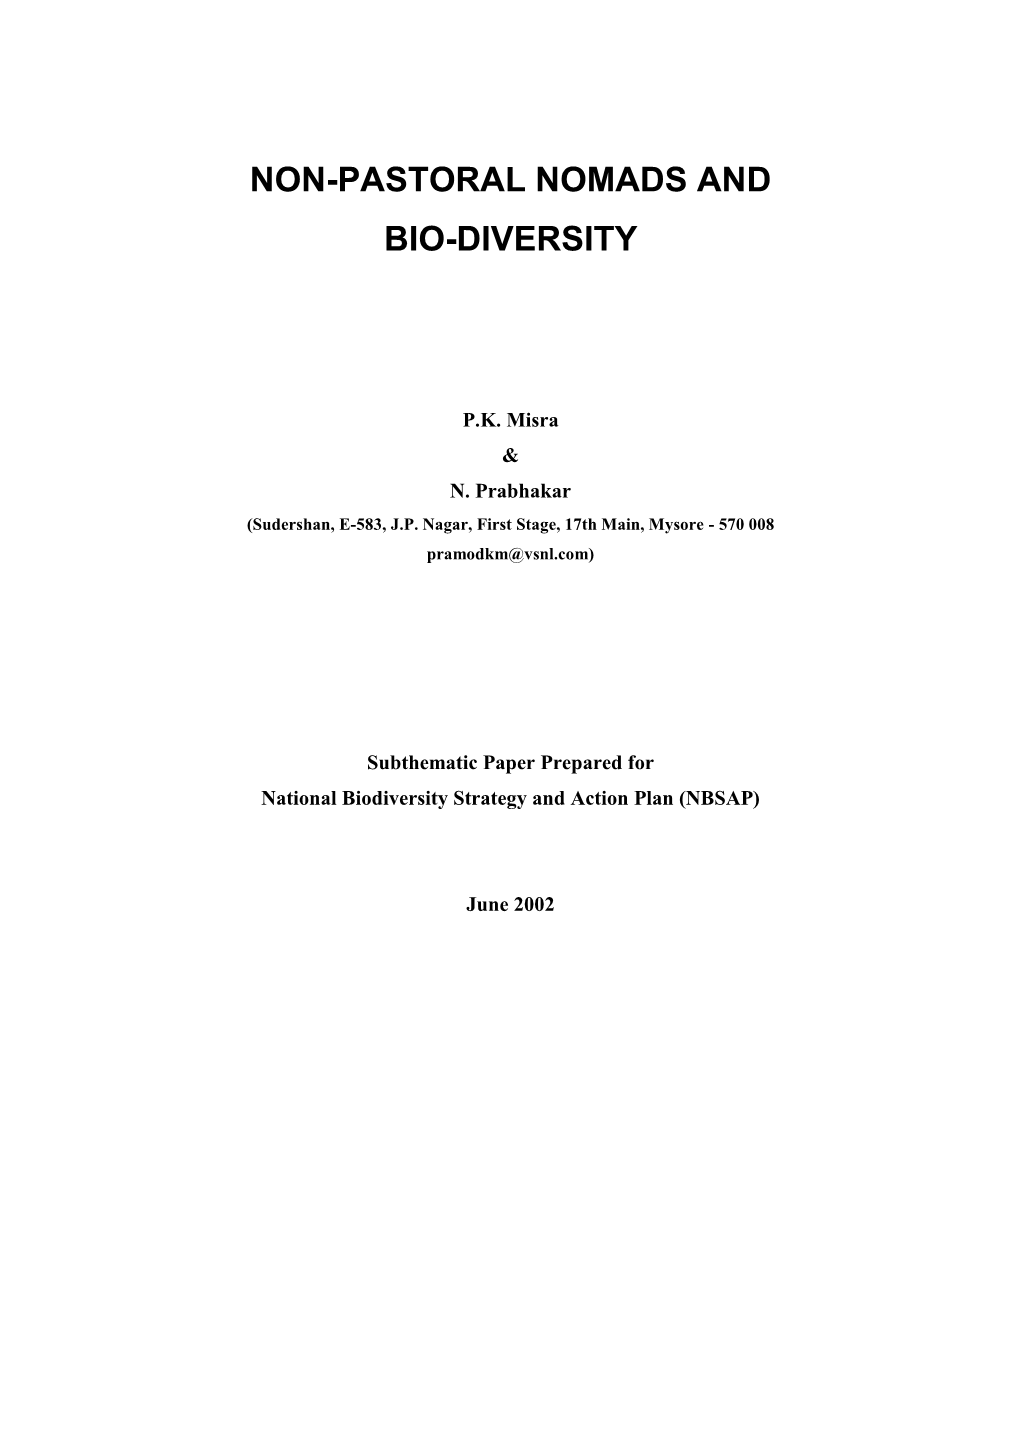 Non-Pastoral Nomads and Biodiversity Sub-Thematic BSAP